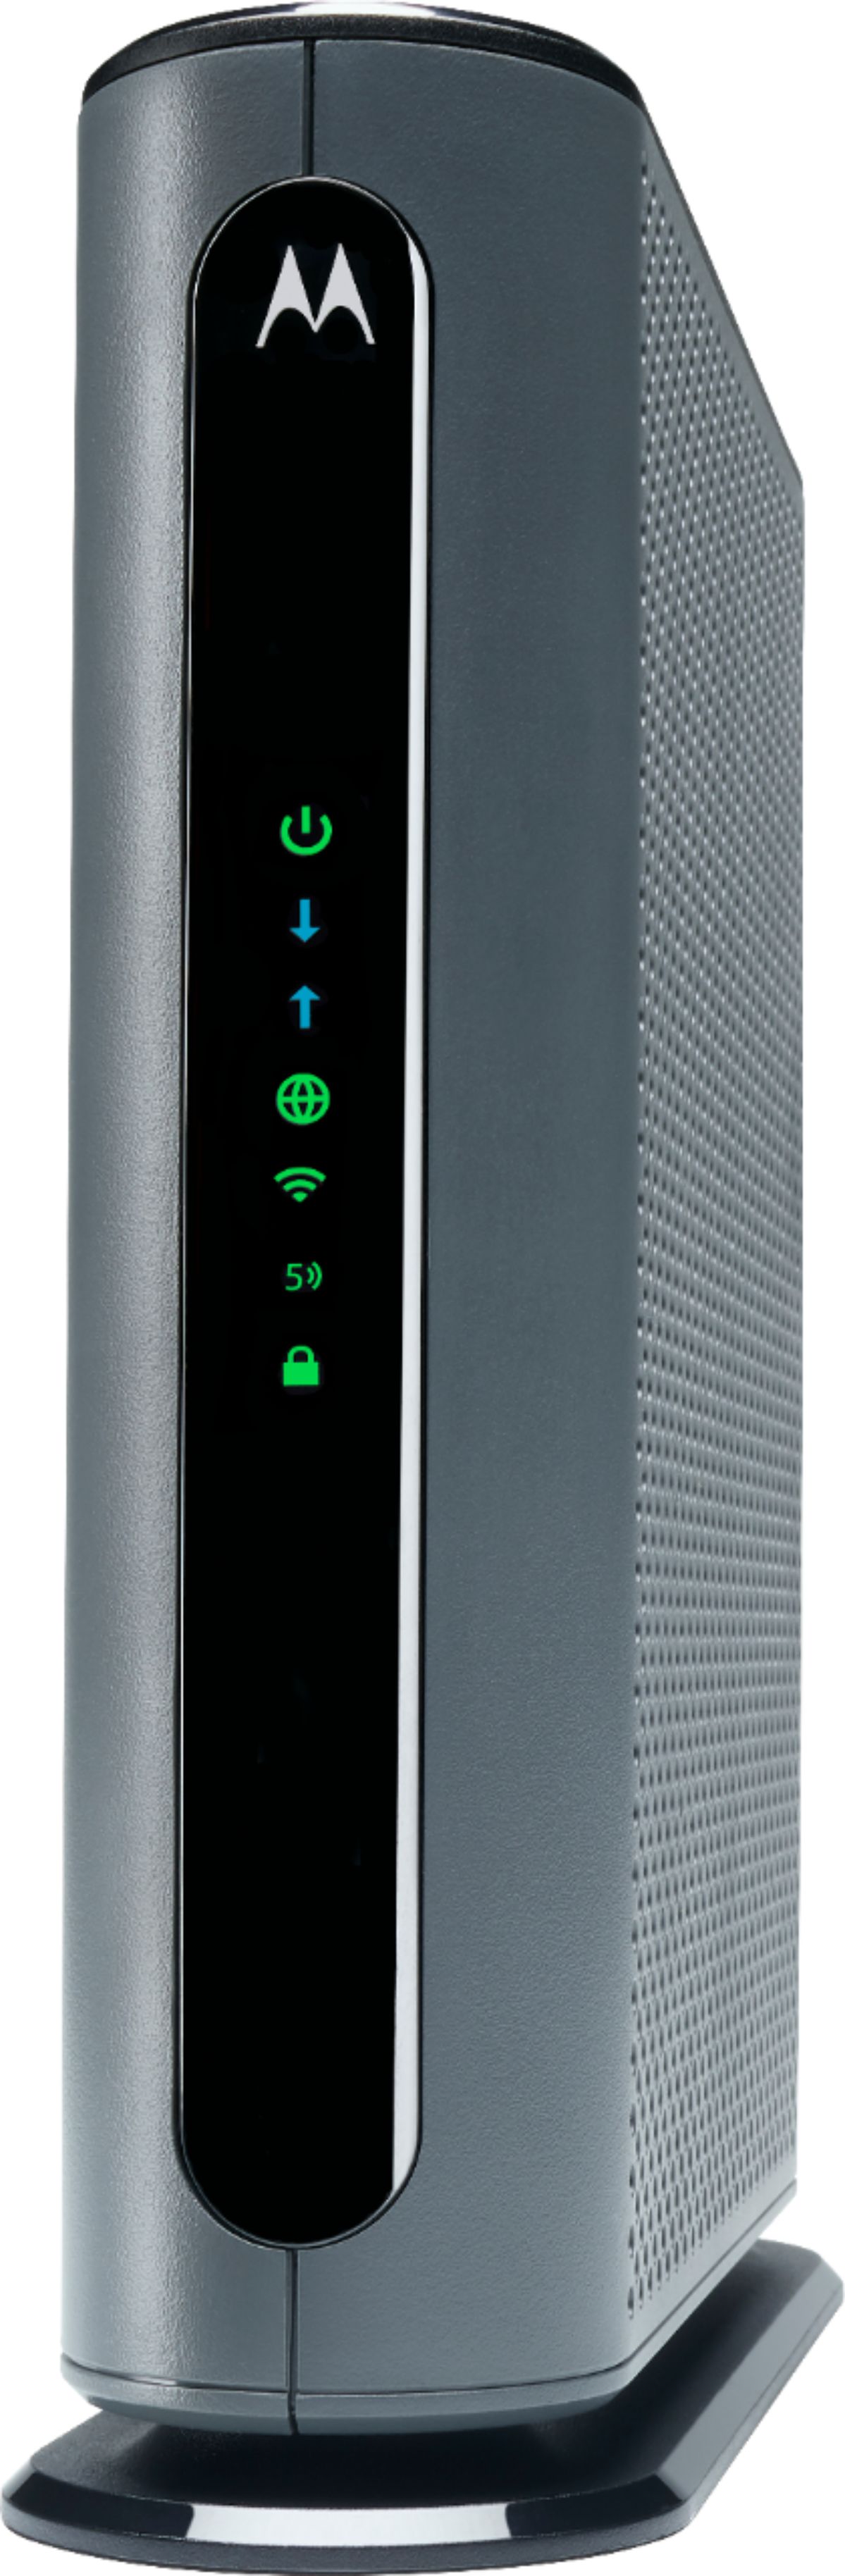 Image of Motorola - MG7700 24x8 DOCSIS 3.0 Cable Modem + AC1900 Router - Black